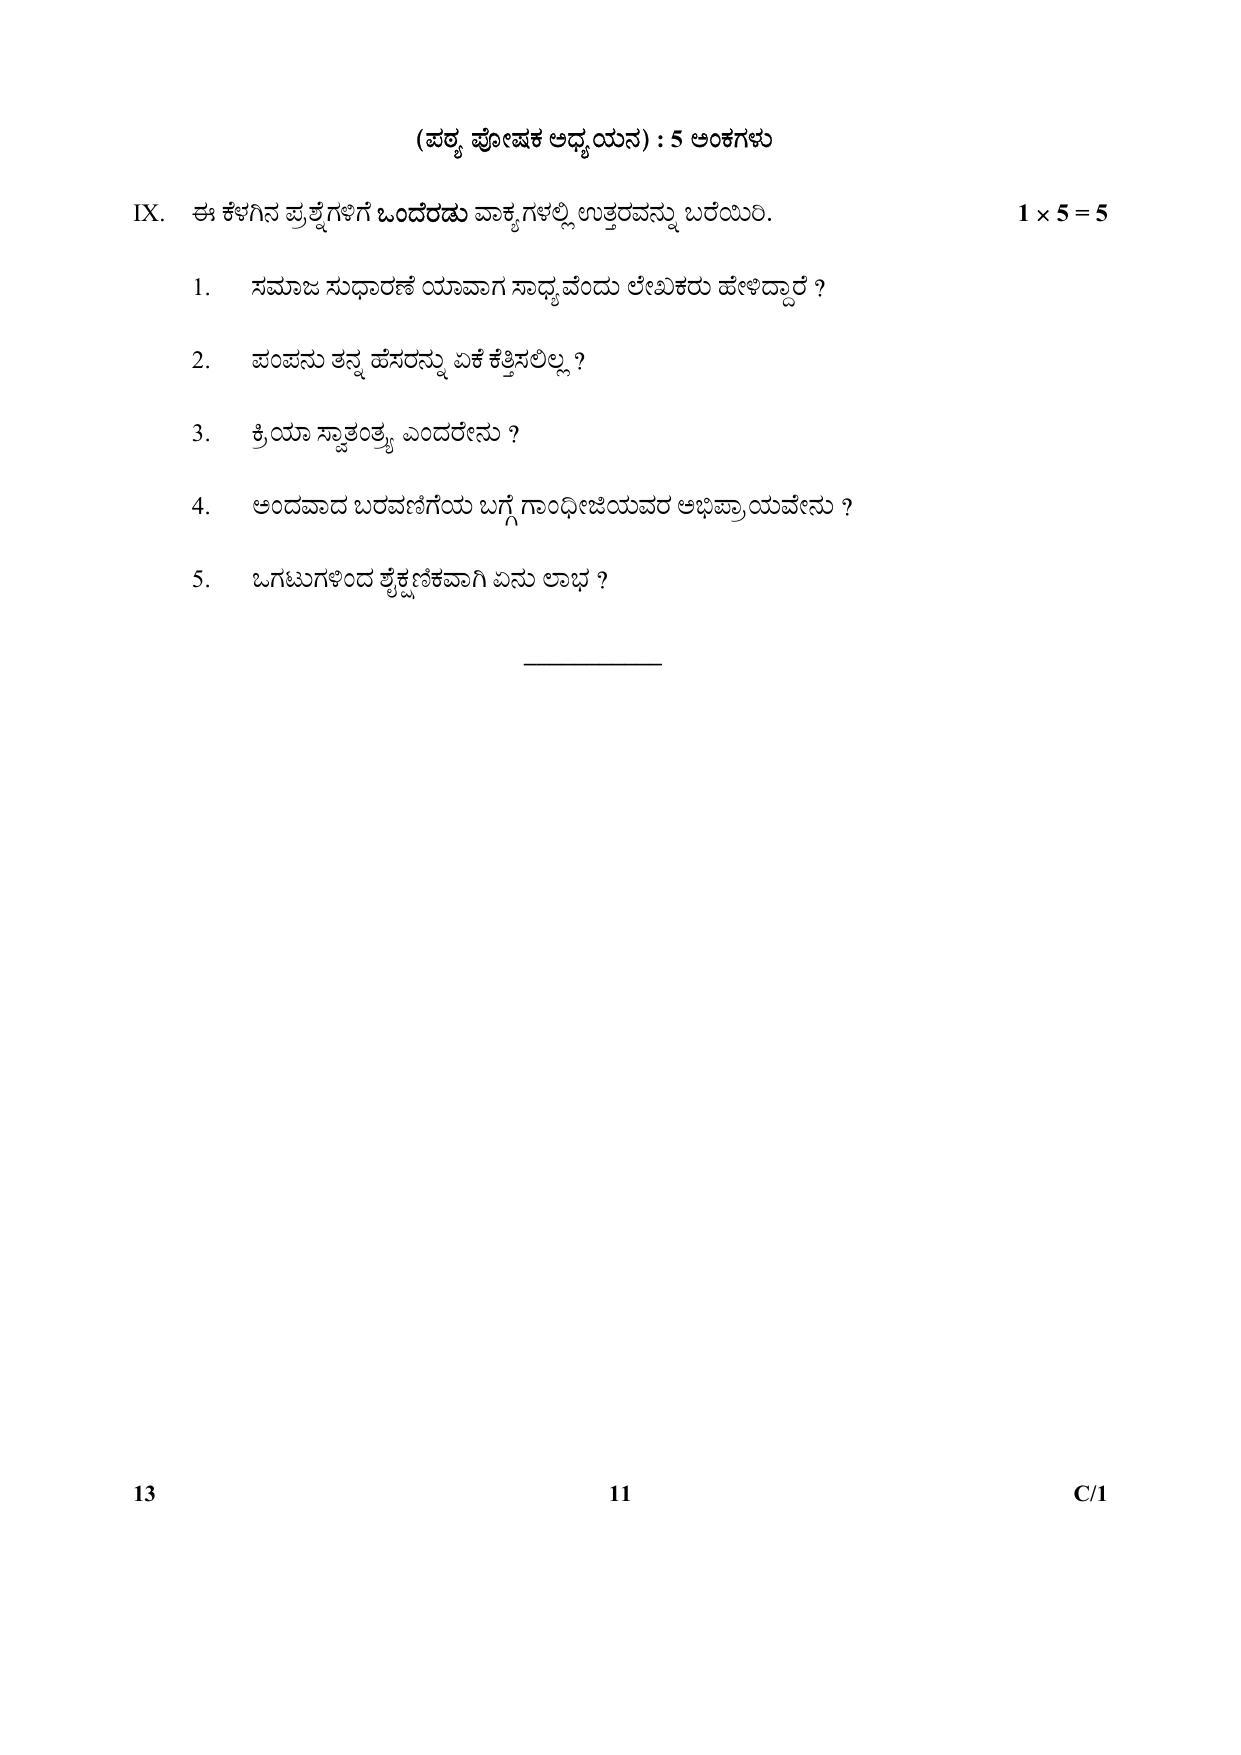 CBSE Class 10 13 (Kannada) 2018 Compartment Question Paper - Page 11